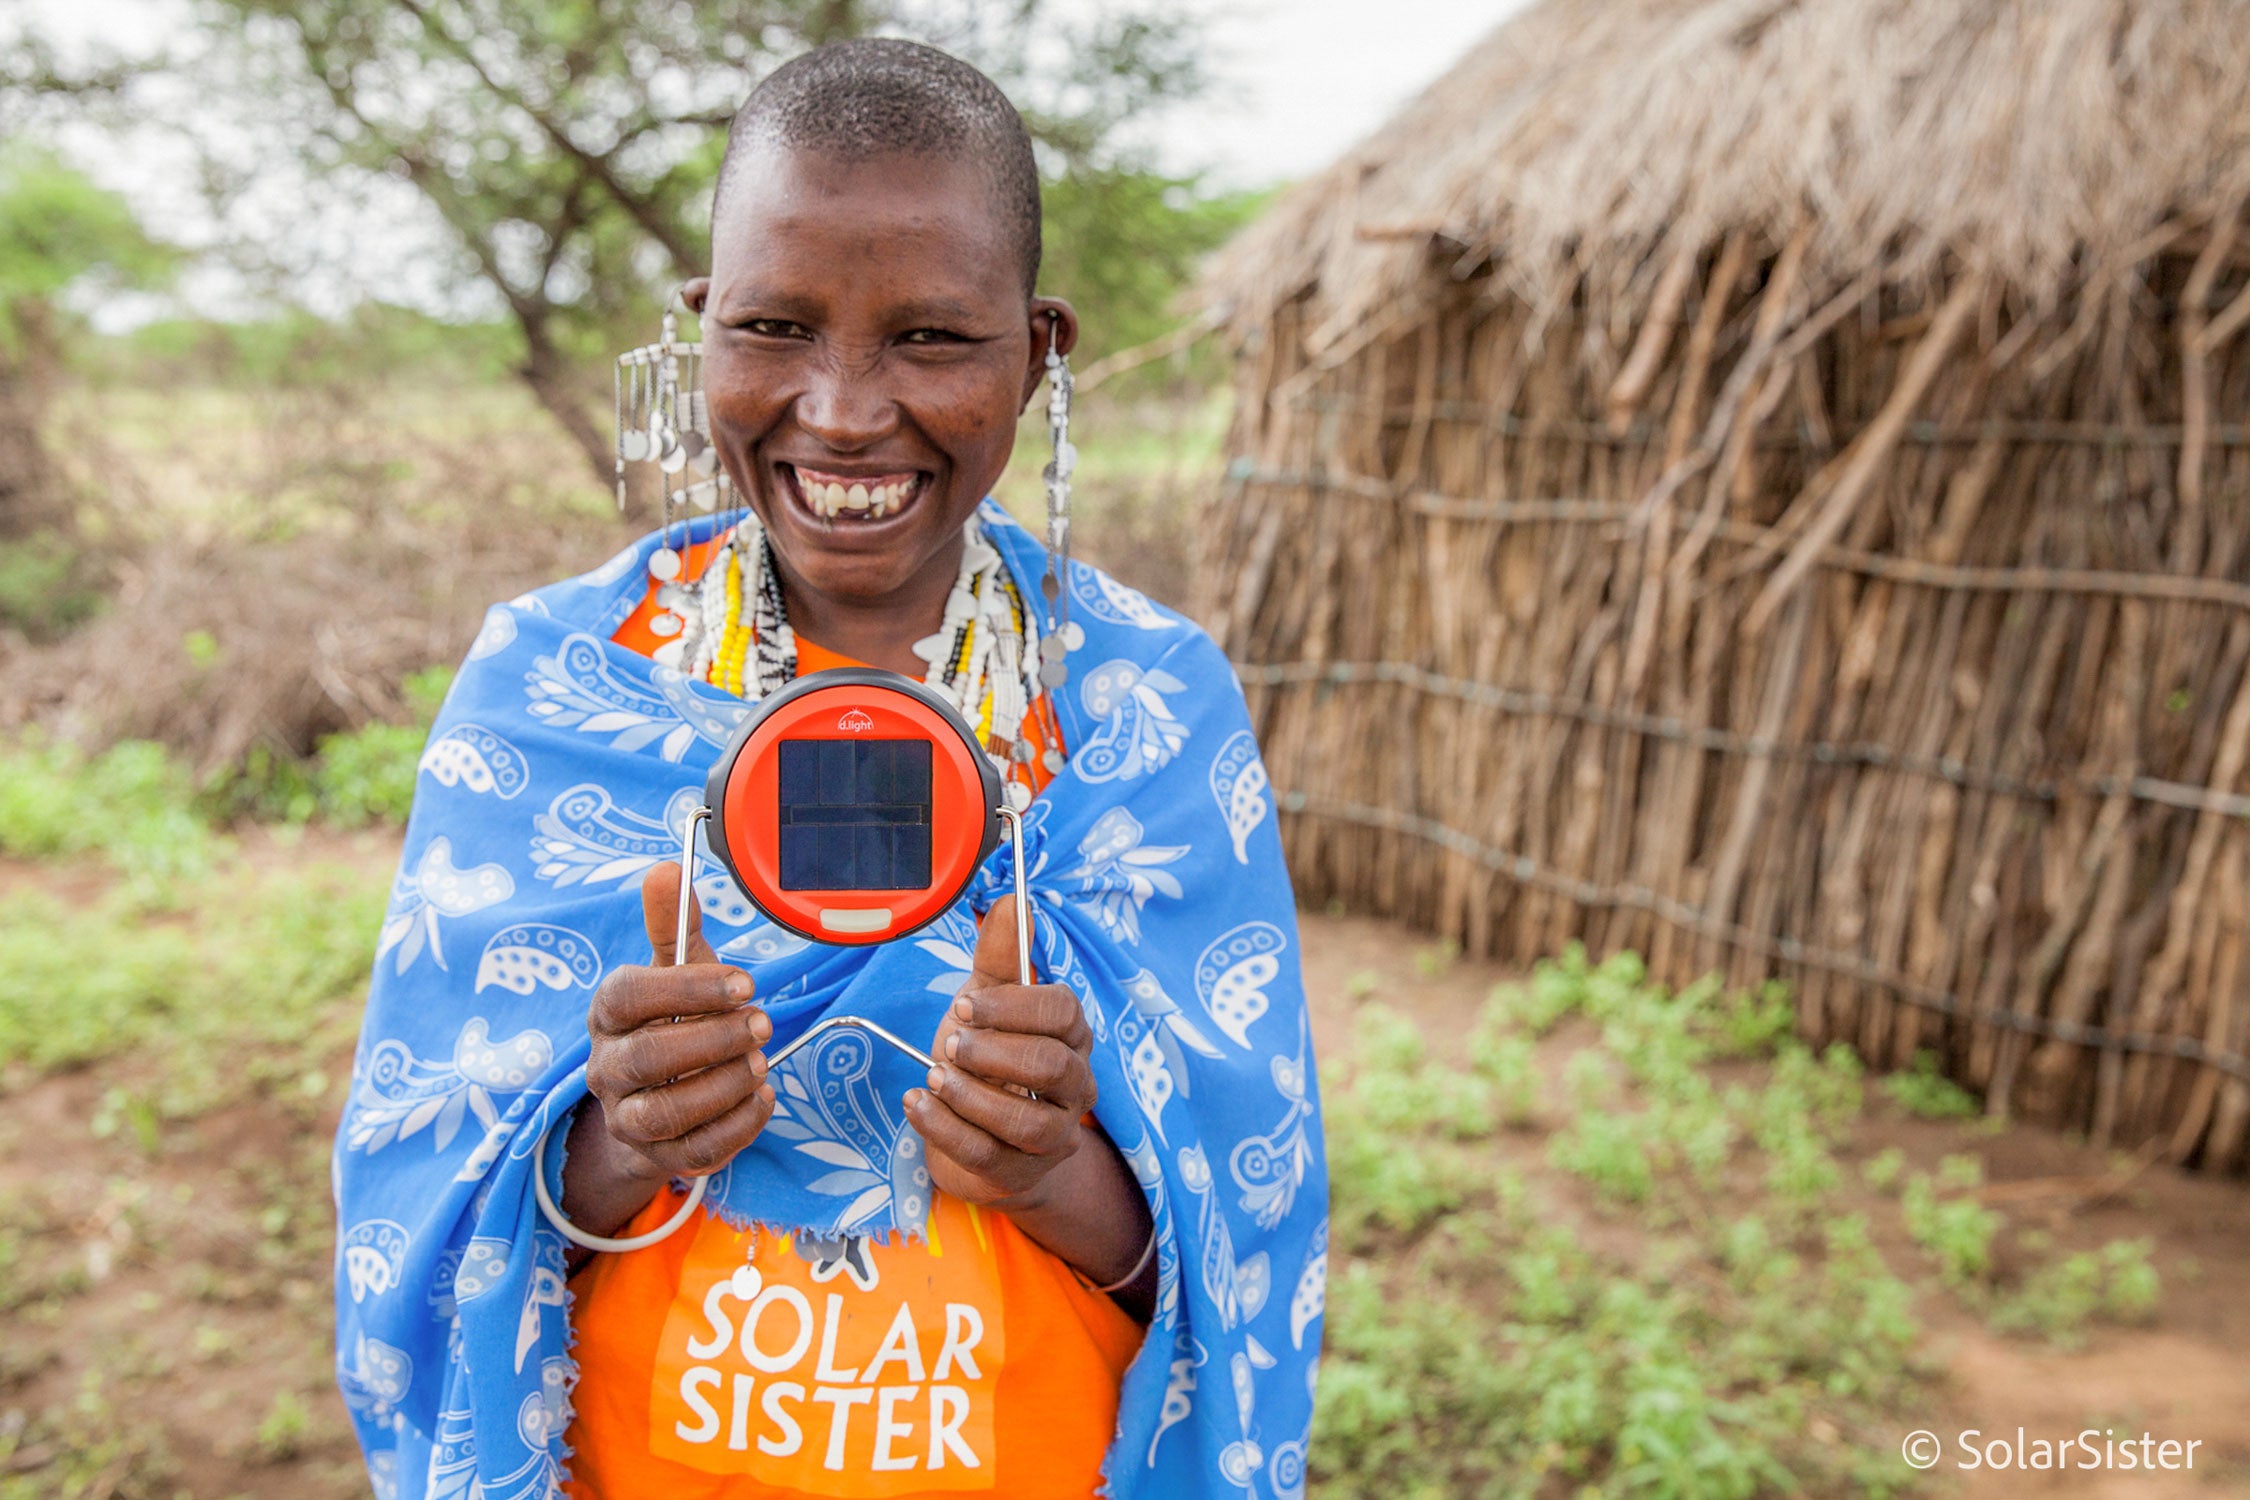 Solar Sister entrepreneur standing outside, smiling at the camera holding one of the products